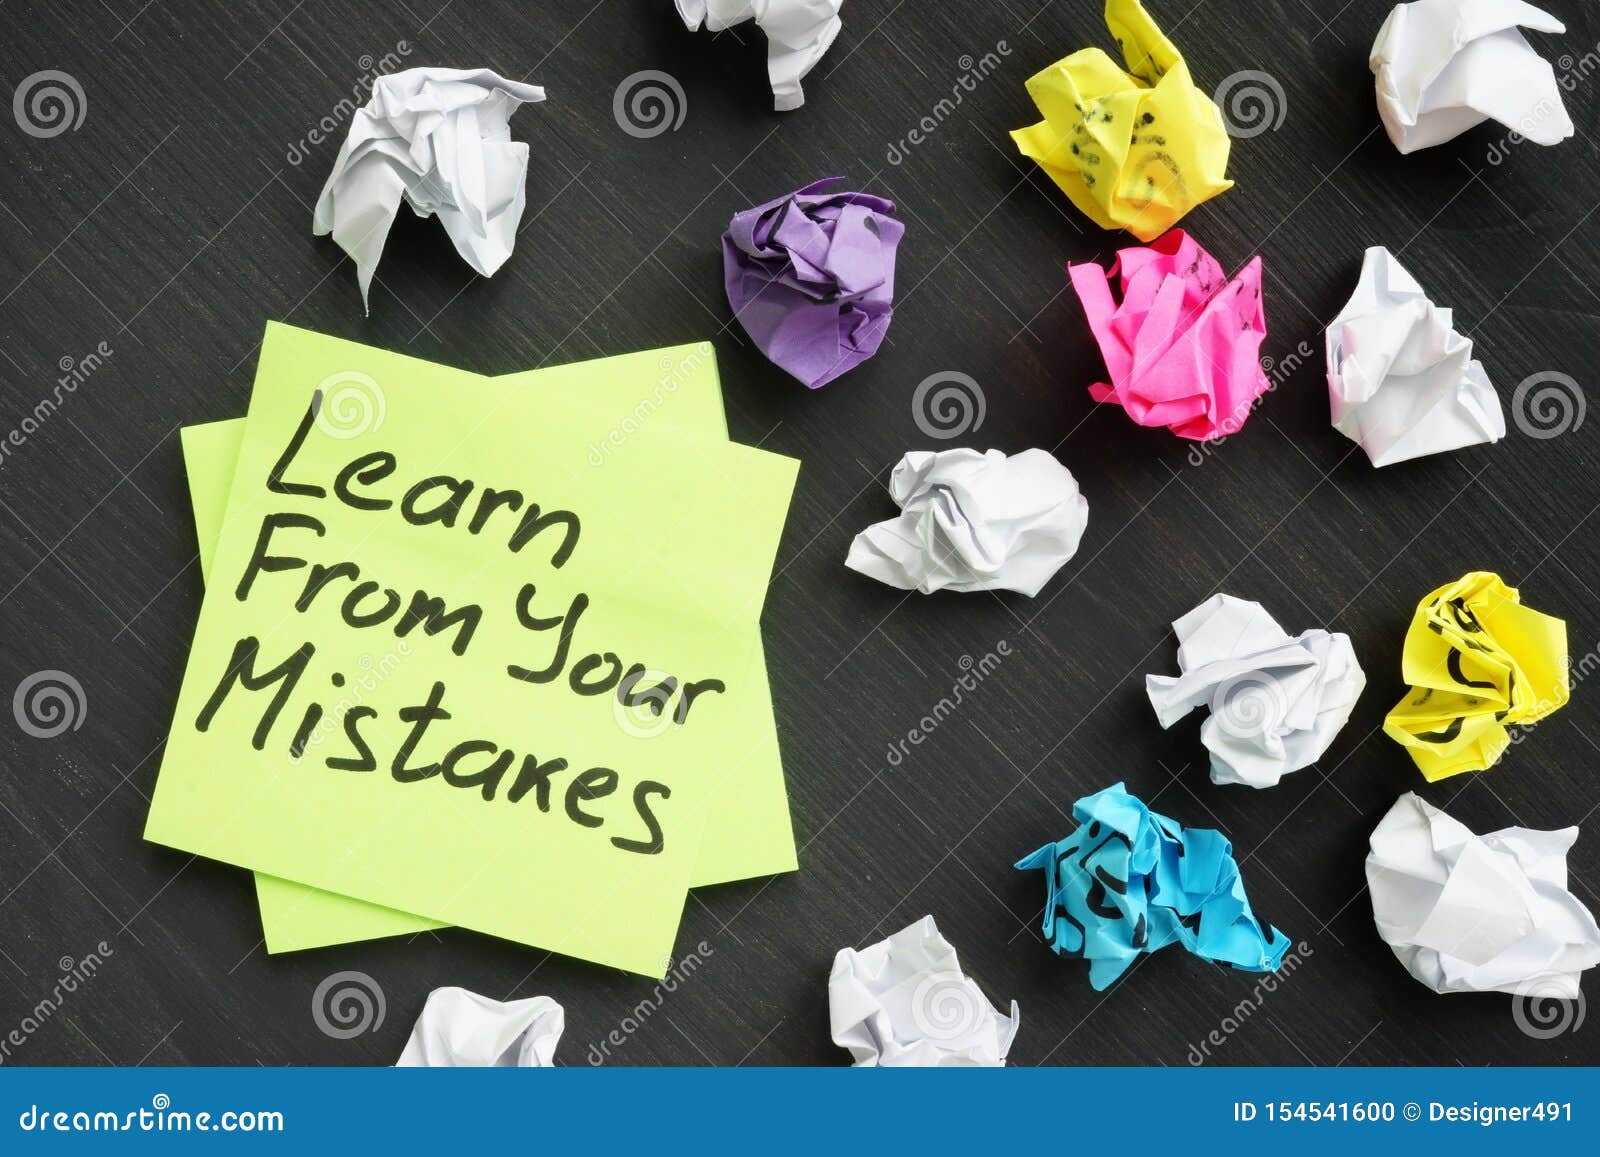 learn from your mistakes and used memo sticks